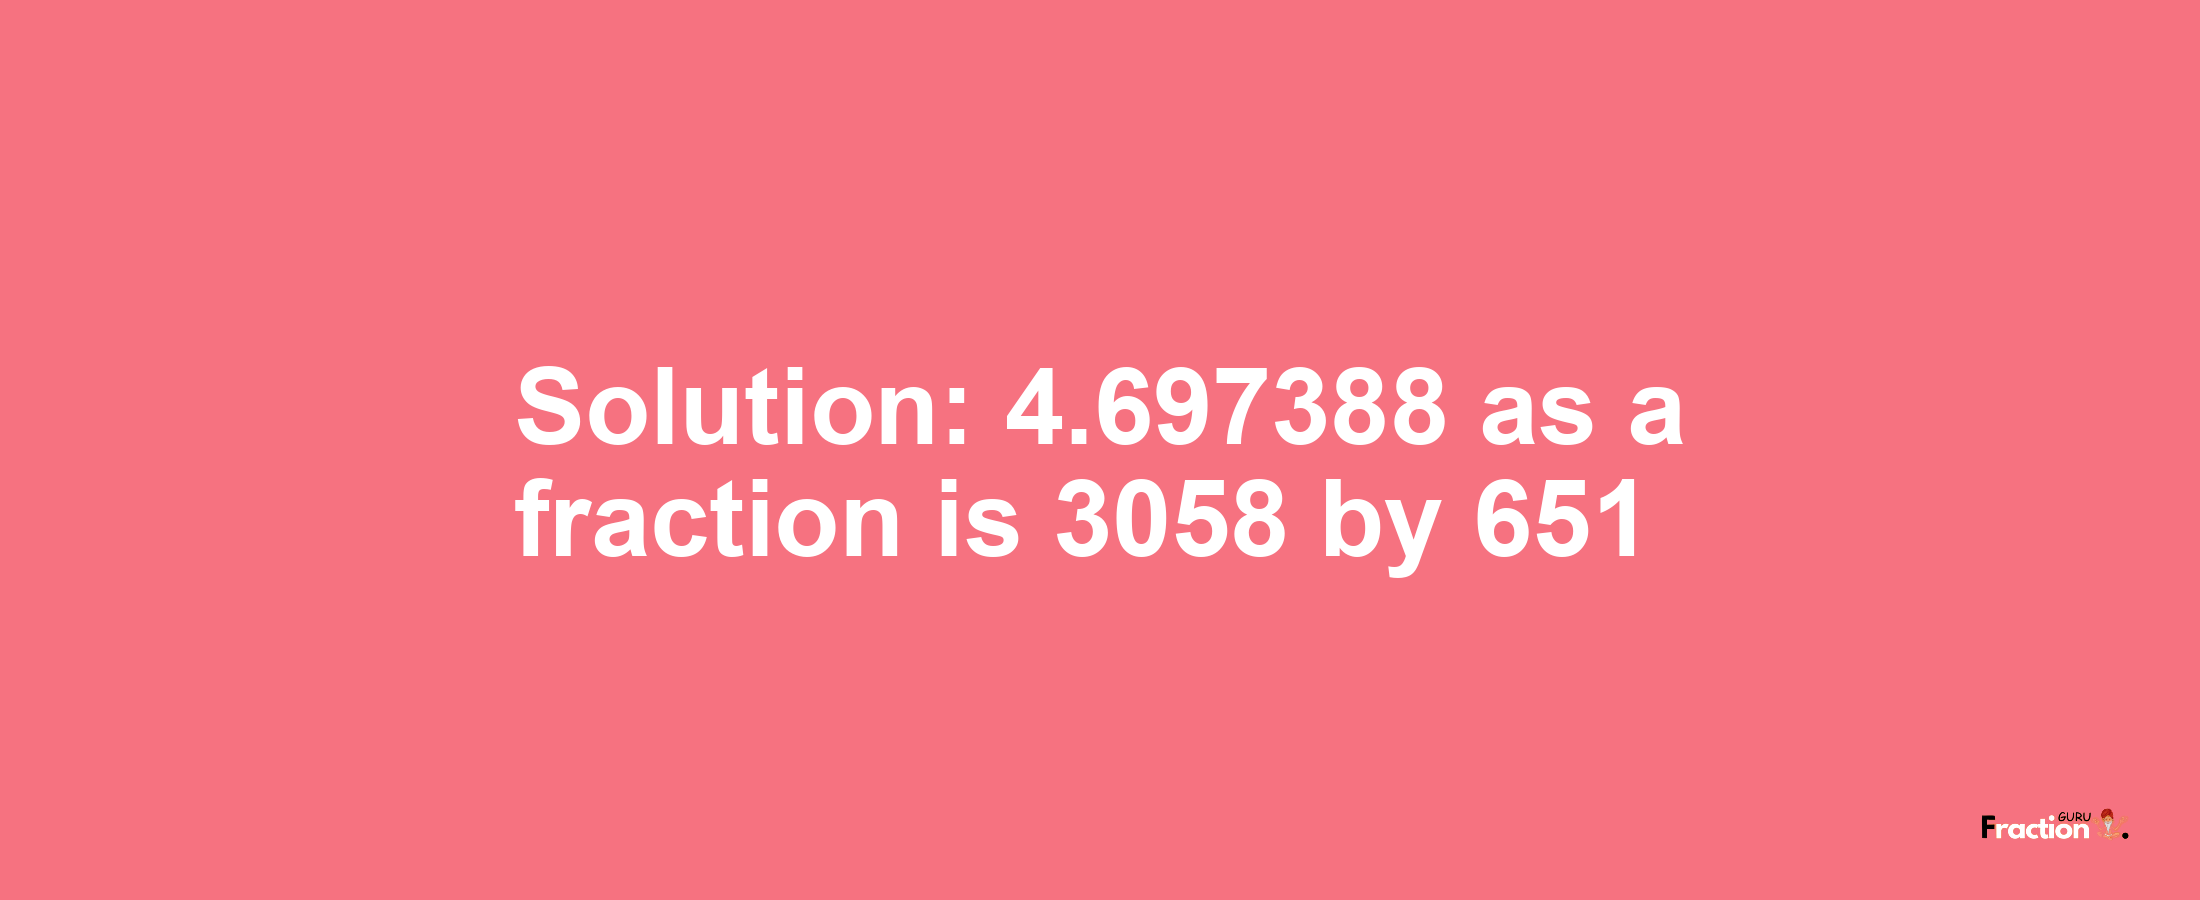 Solution:4.697388 as a fraction is 3058/651